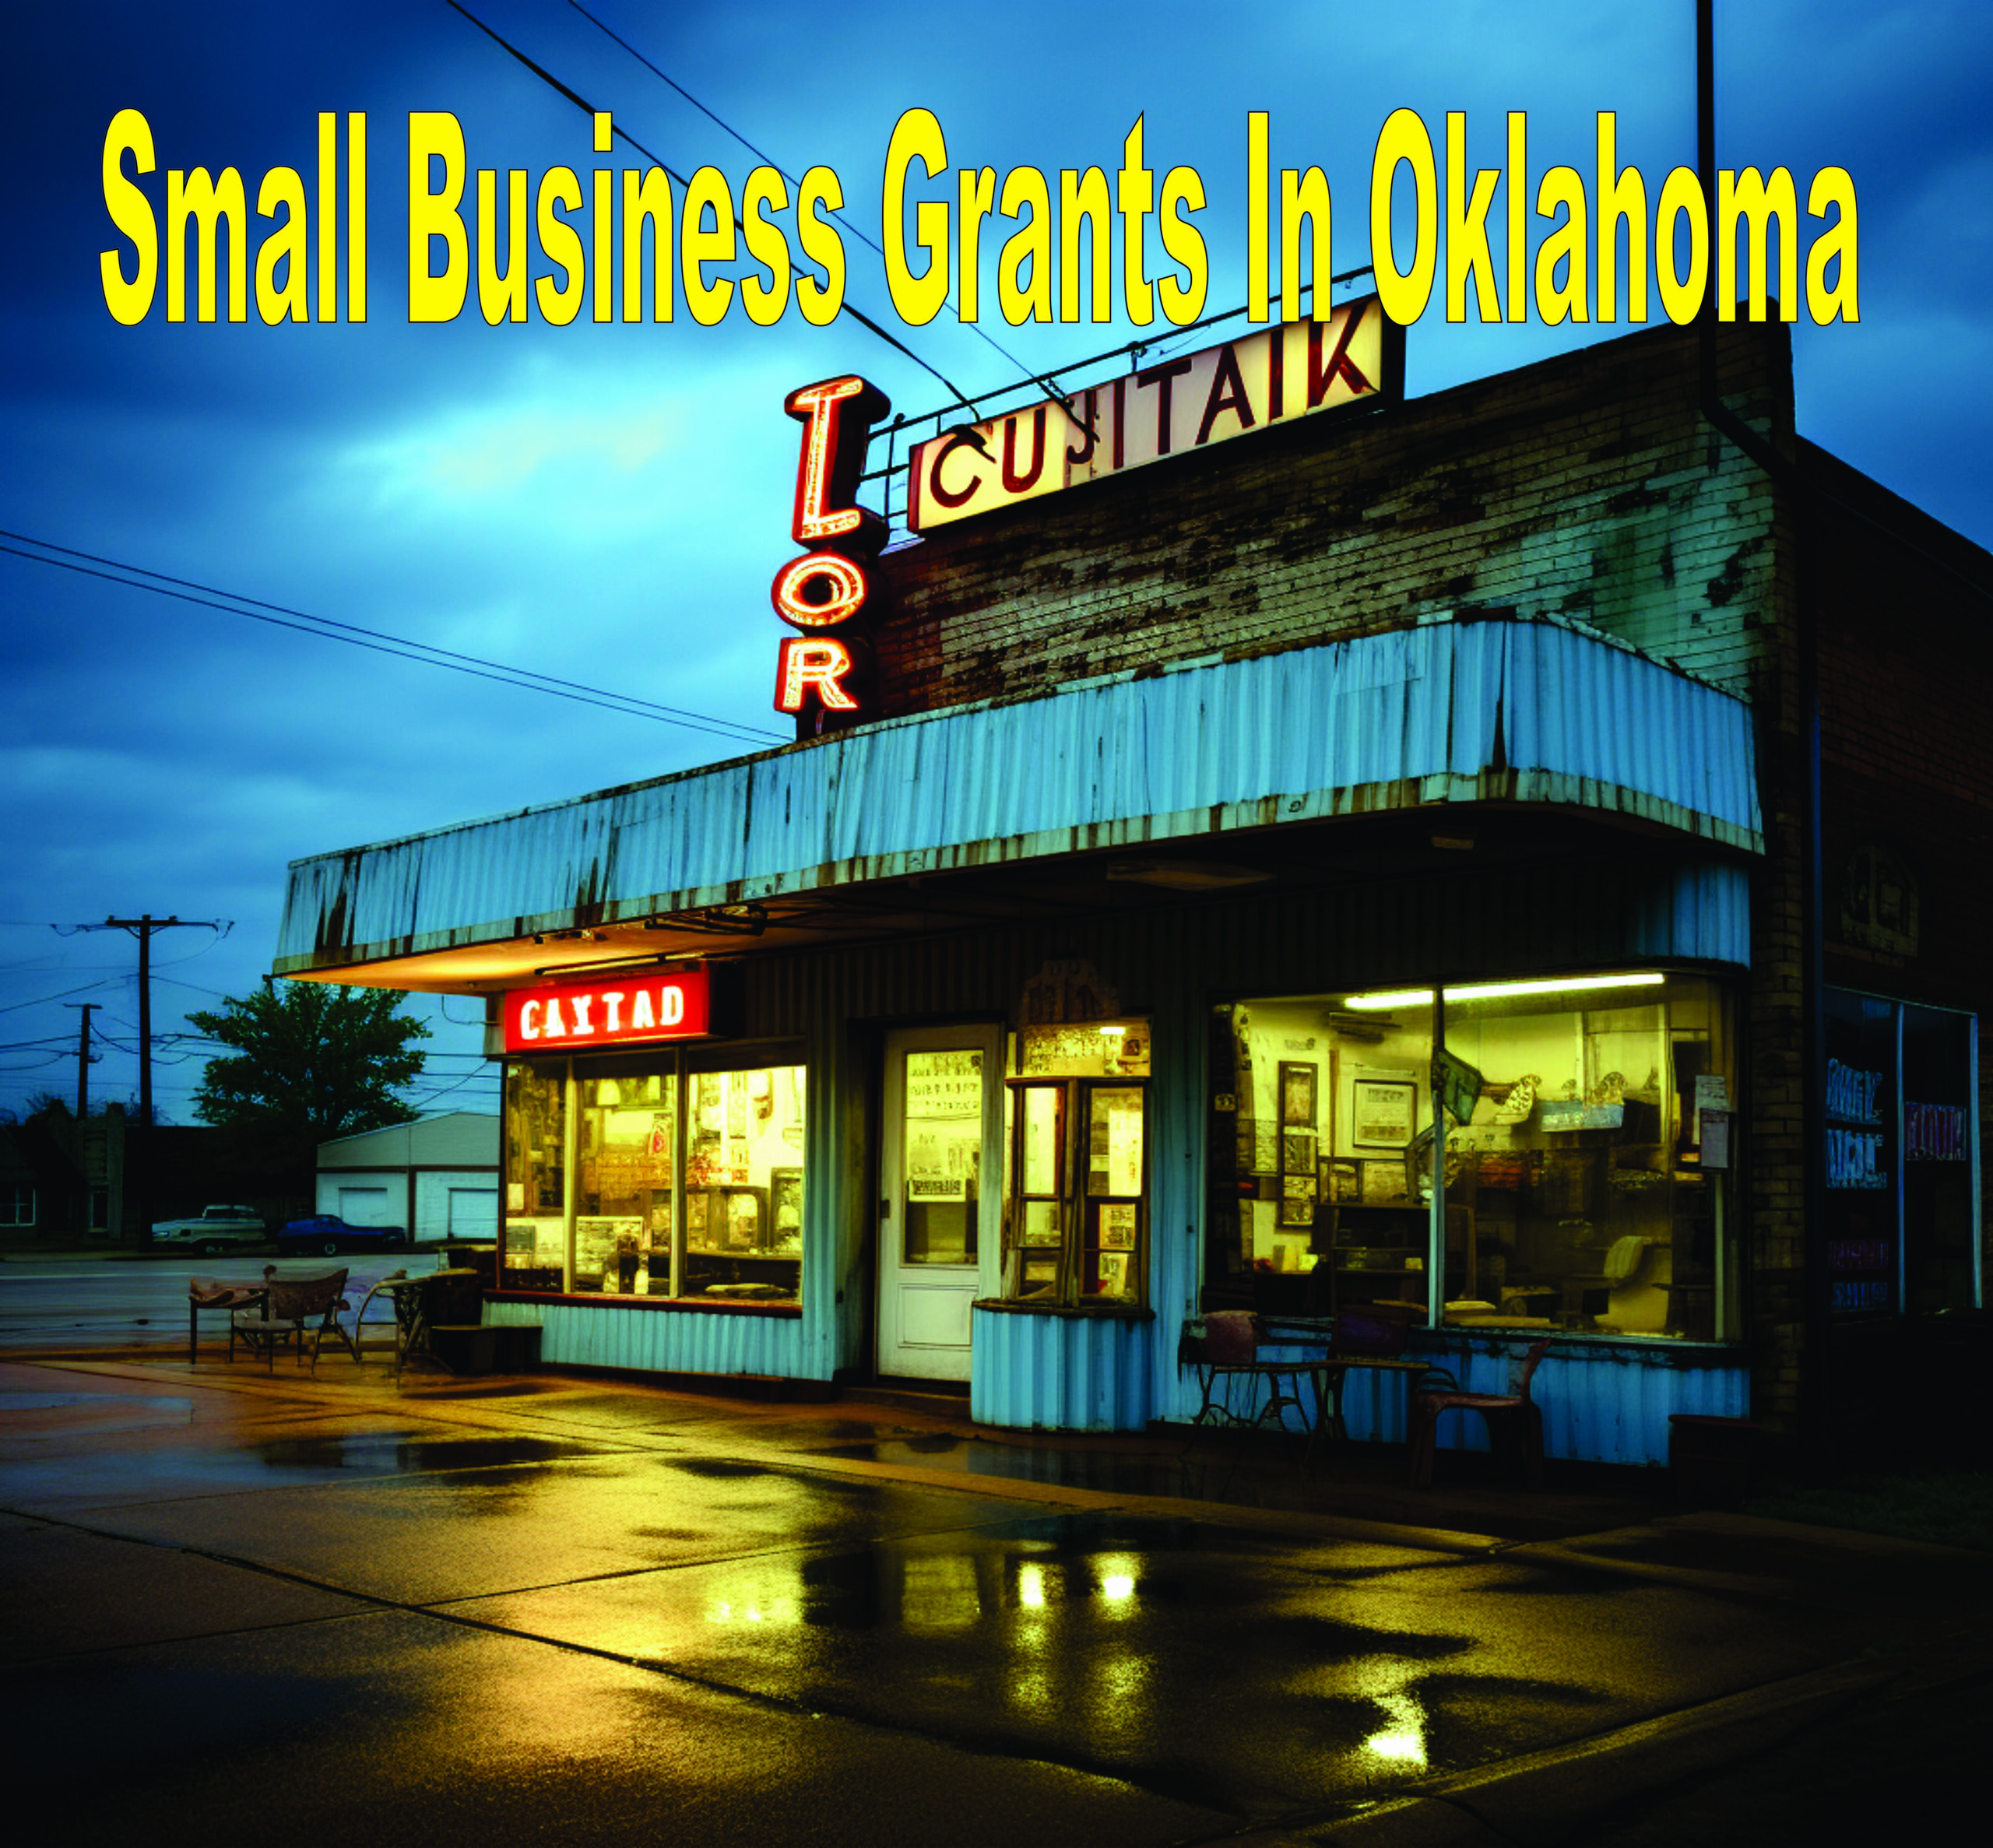 Small Business Grants In Oklahoma